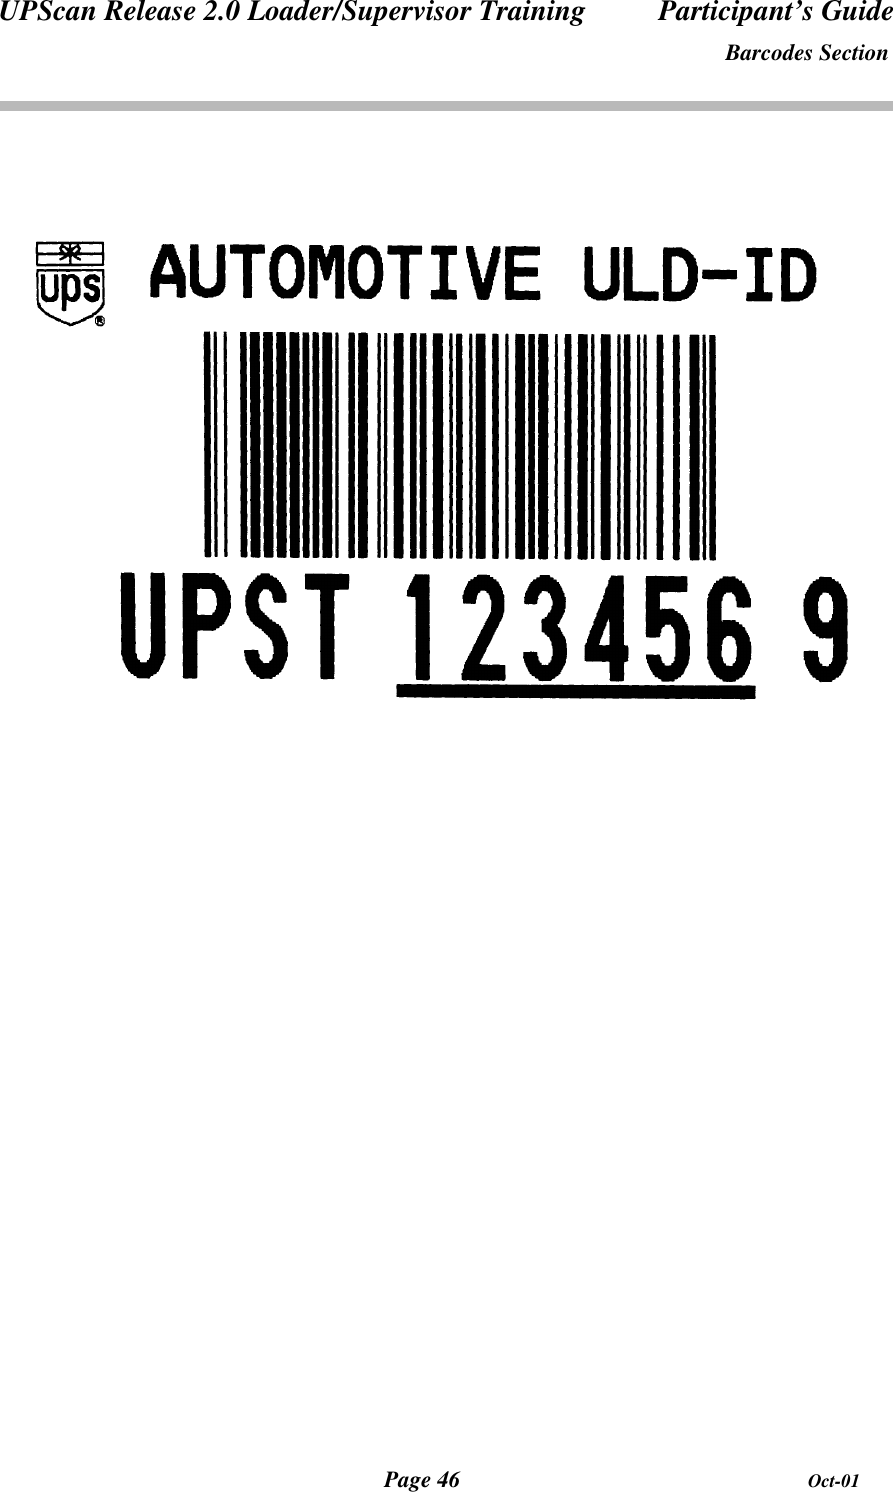 UPScan Release 2.0 Loader/Supervisor Training Participant’s GuideBarcodes SectionPage 46 Oct-01